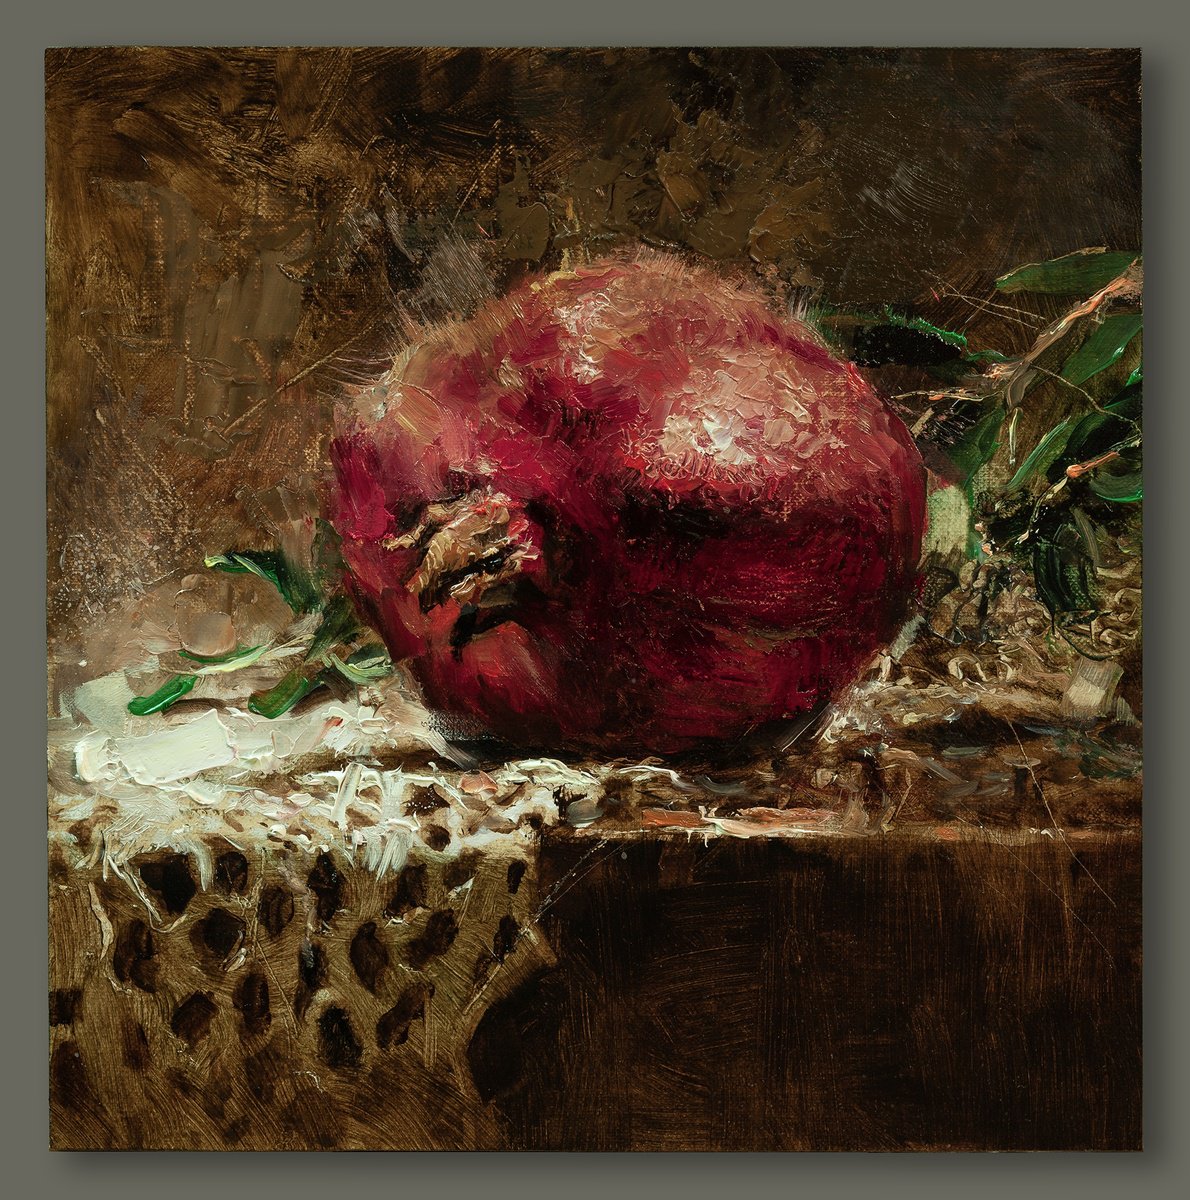 Pomegranate by Tom Off